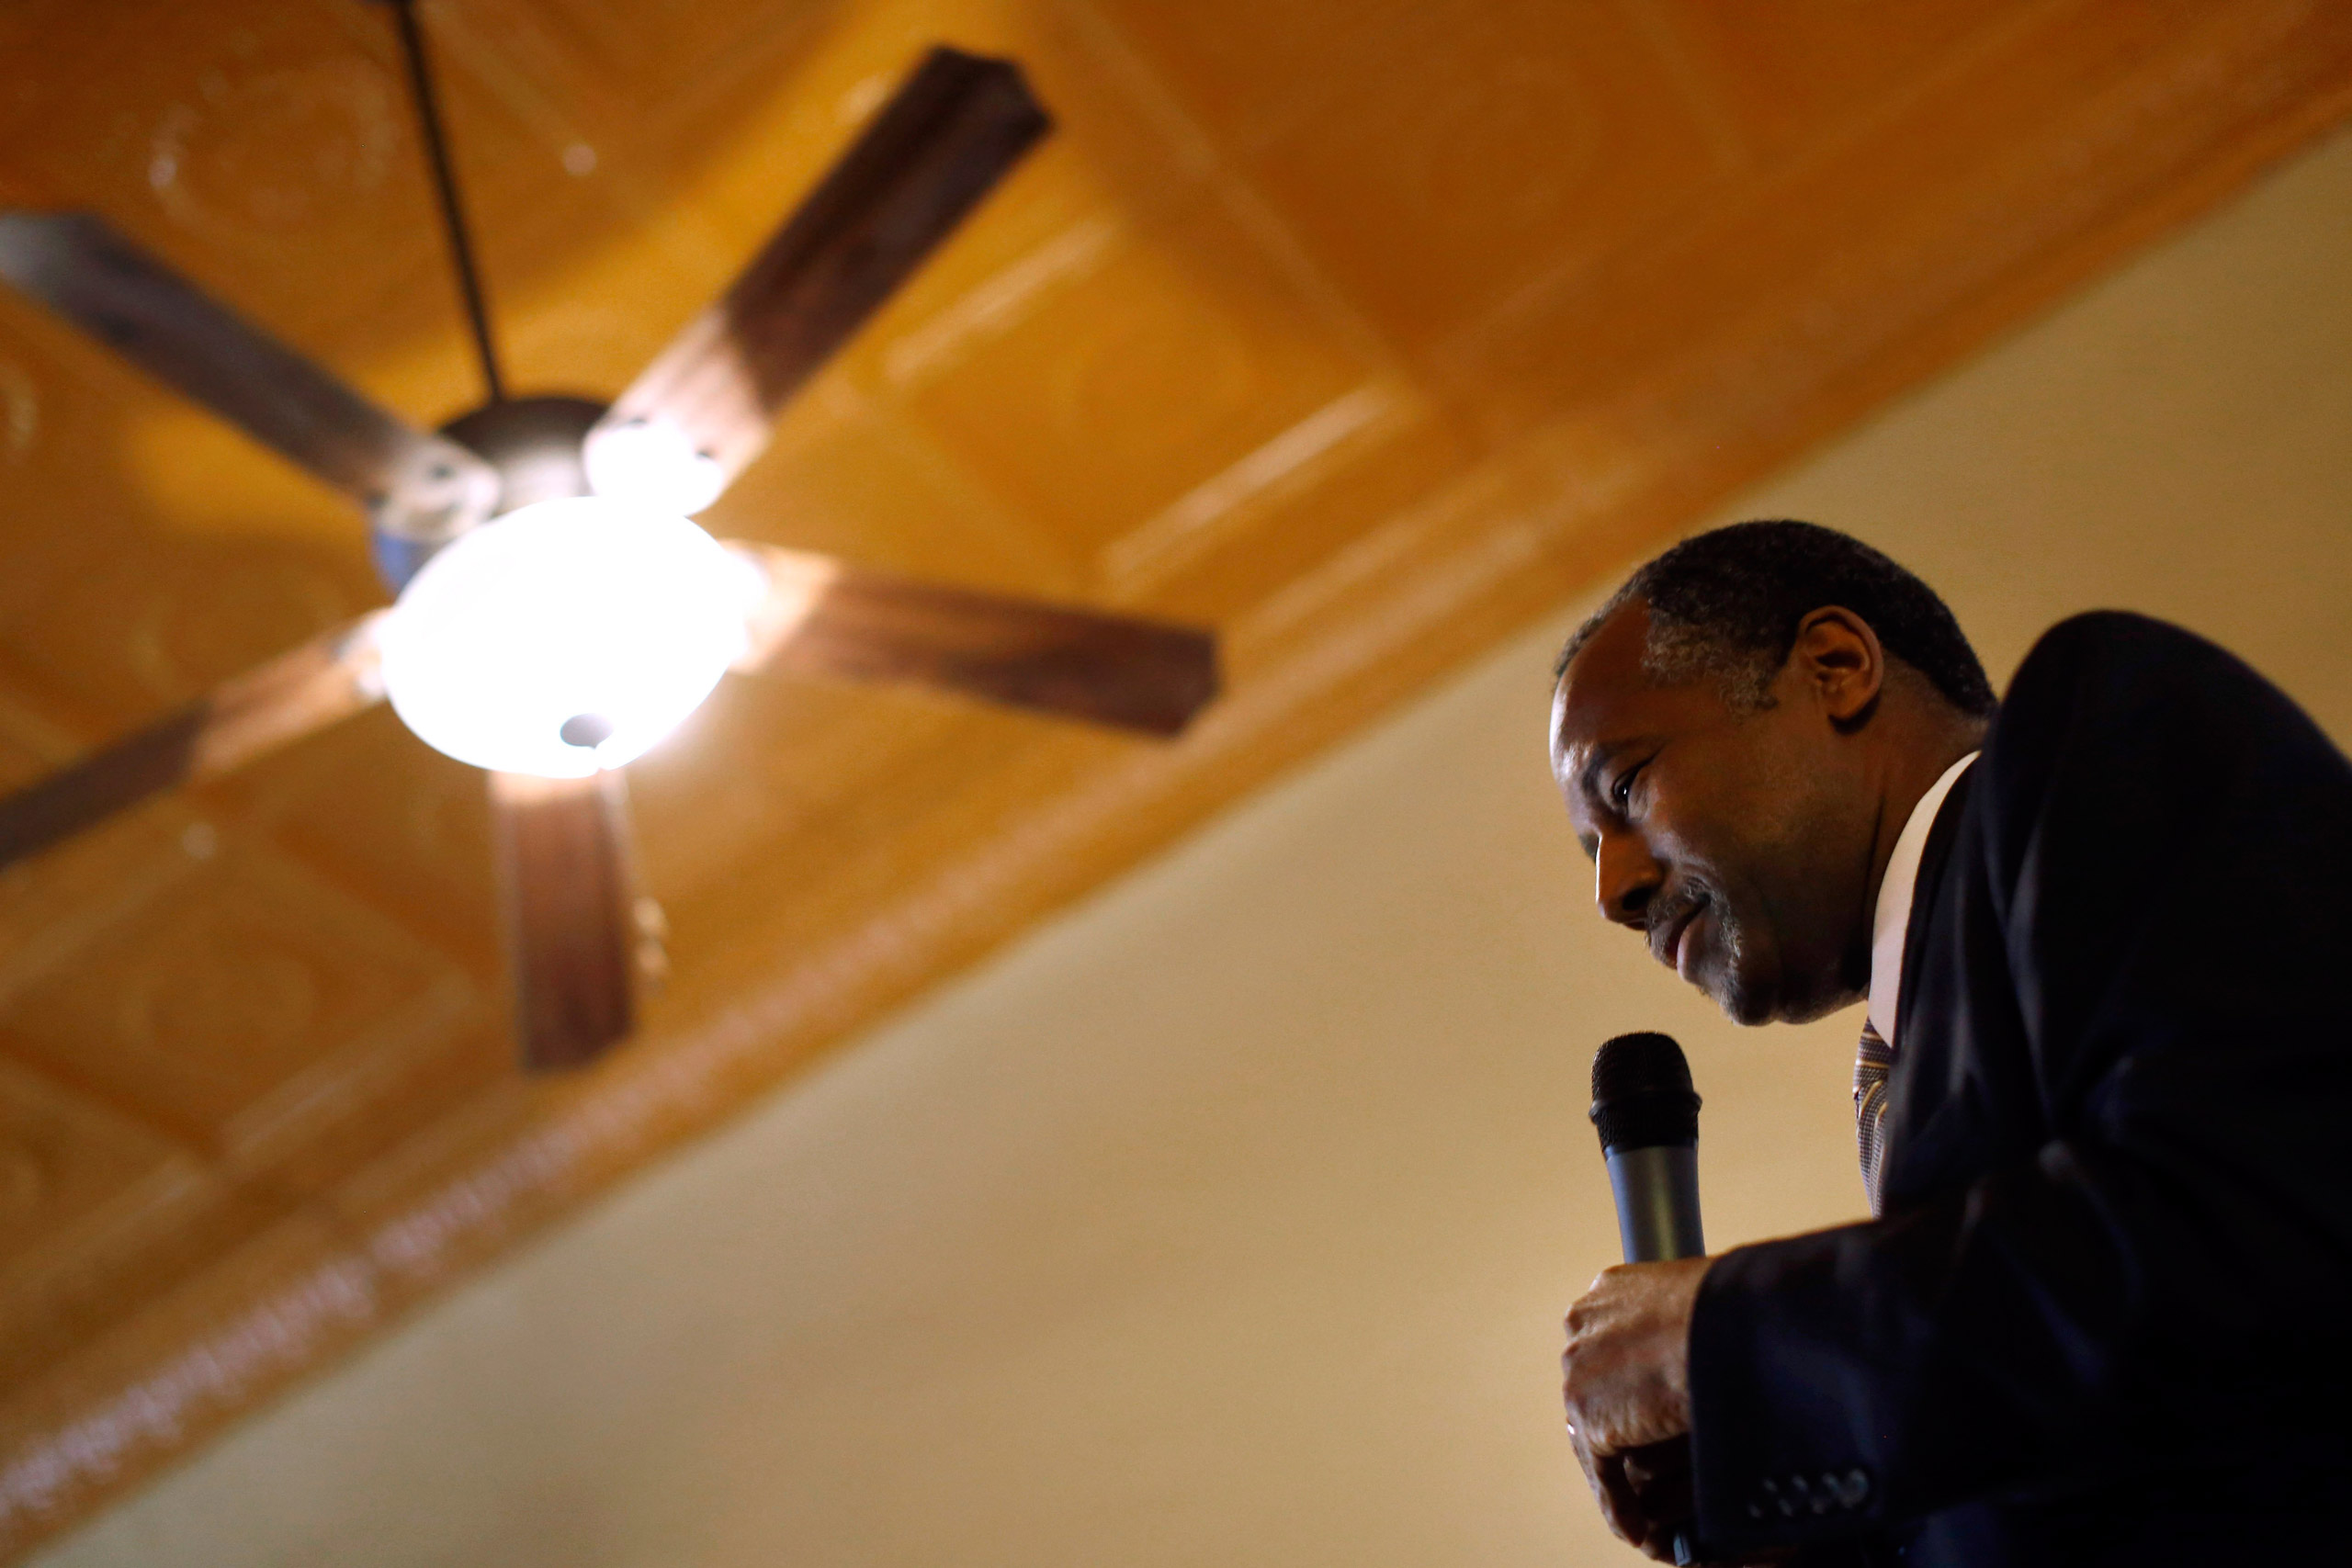 Republican presidential candidate Dr. Ben Carson speaks during a town hall meeting in Creston, Iowa, on Jan. 22, 2016. (Patrick Semansky—AP)